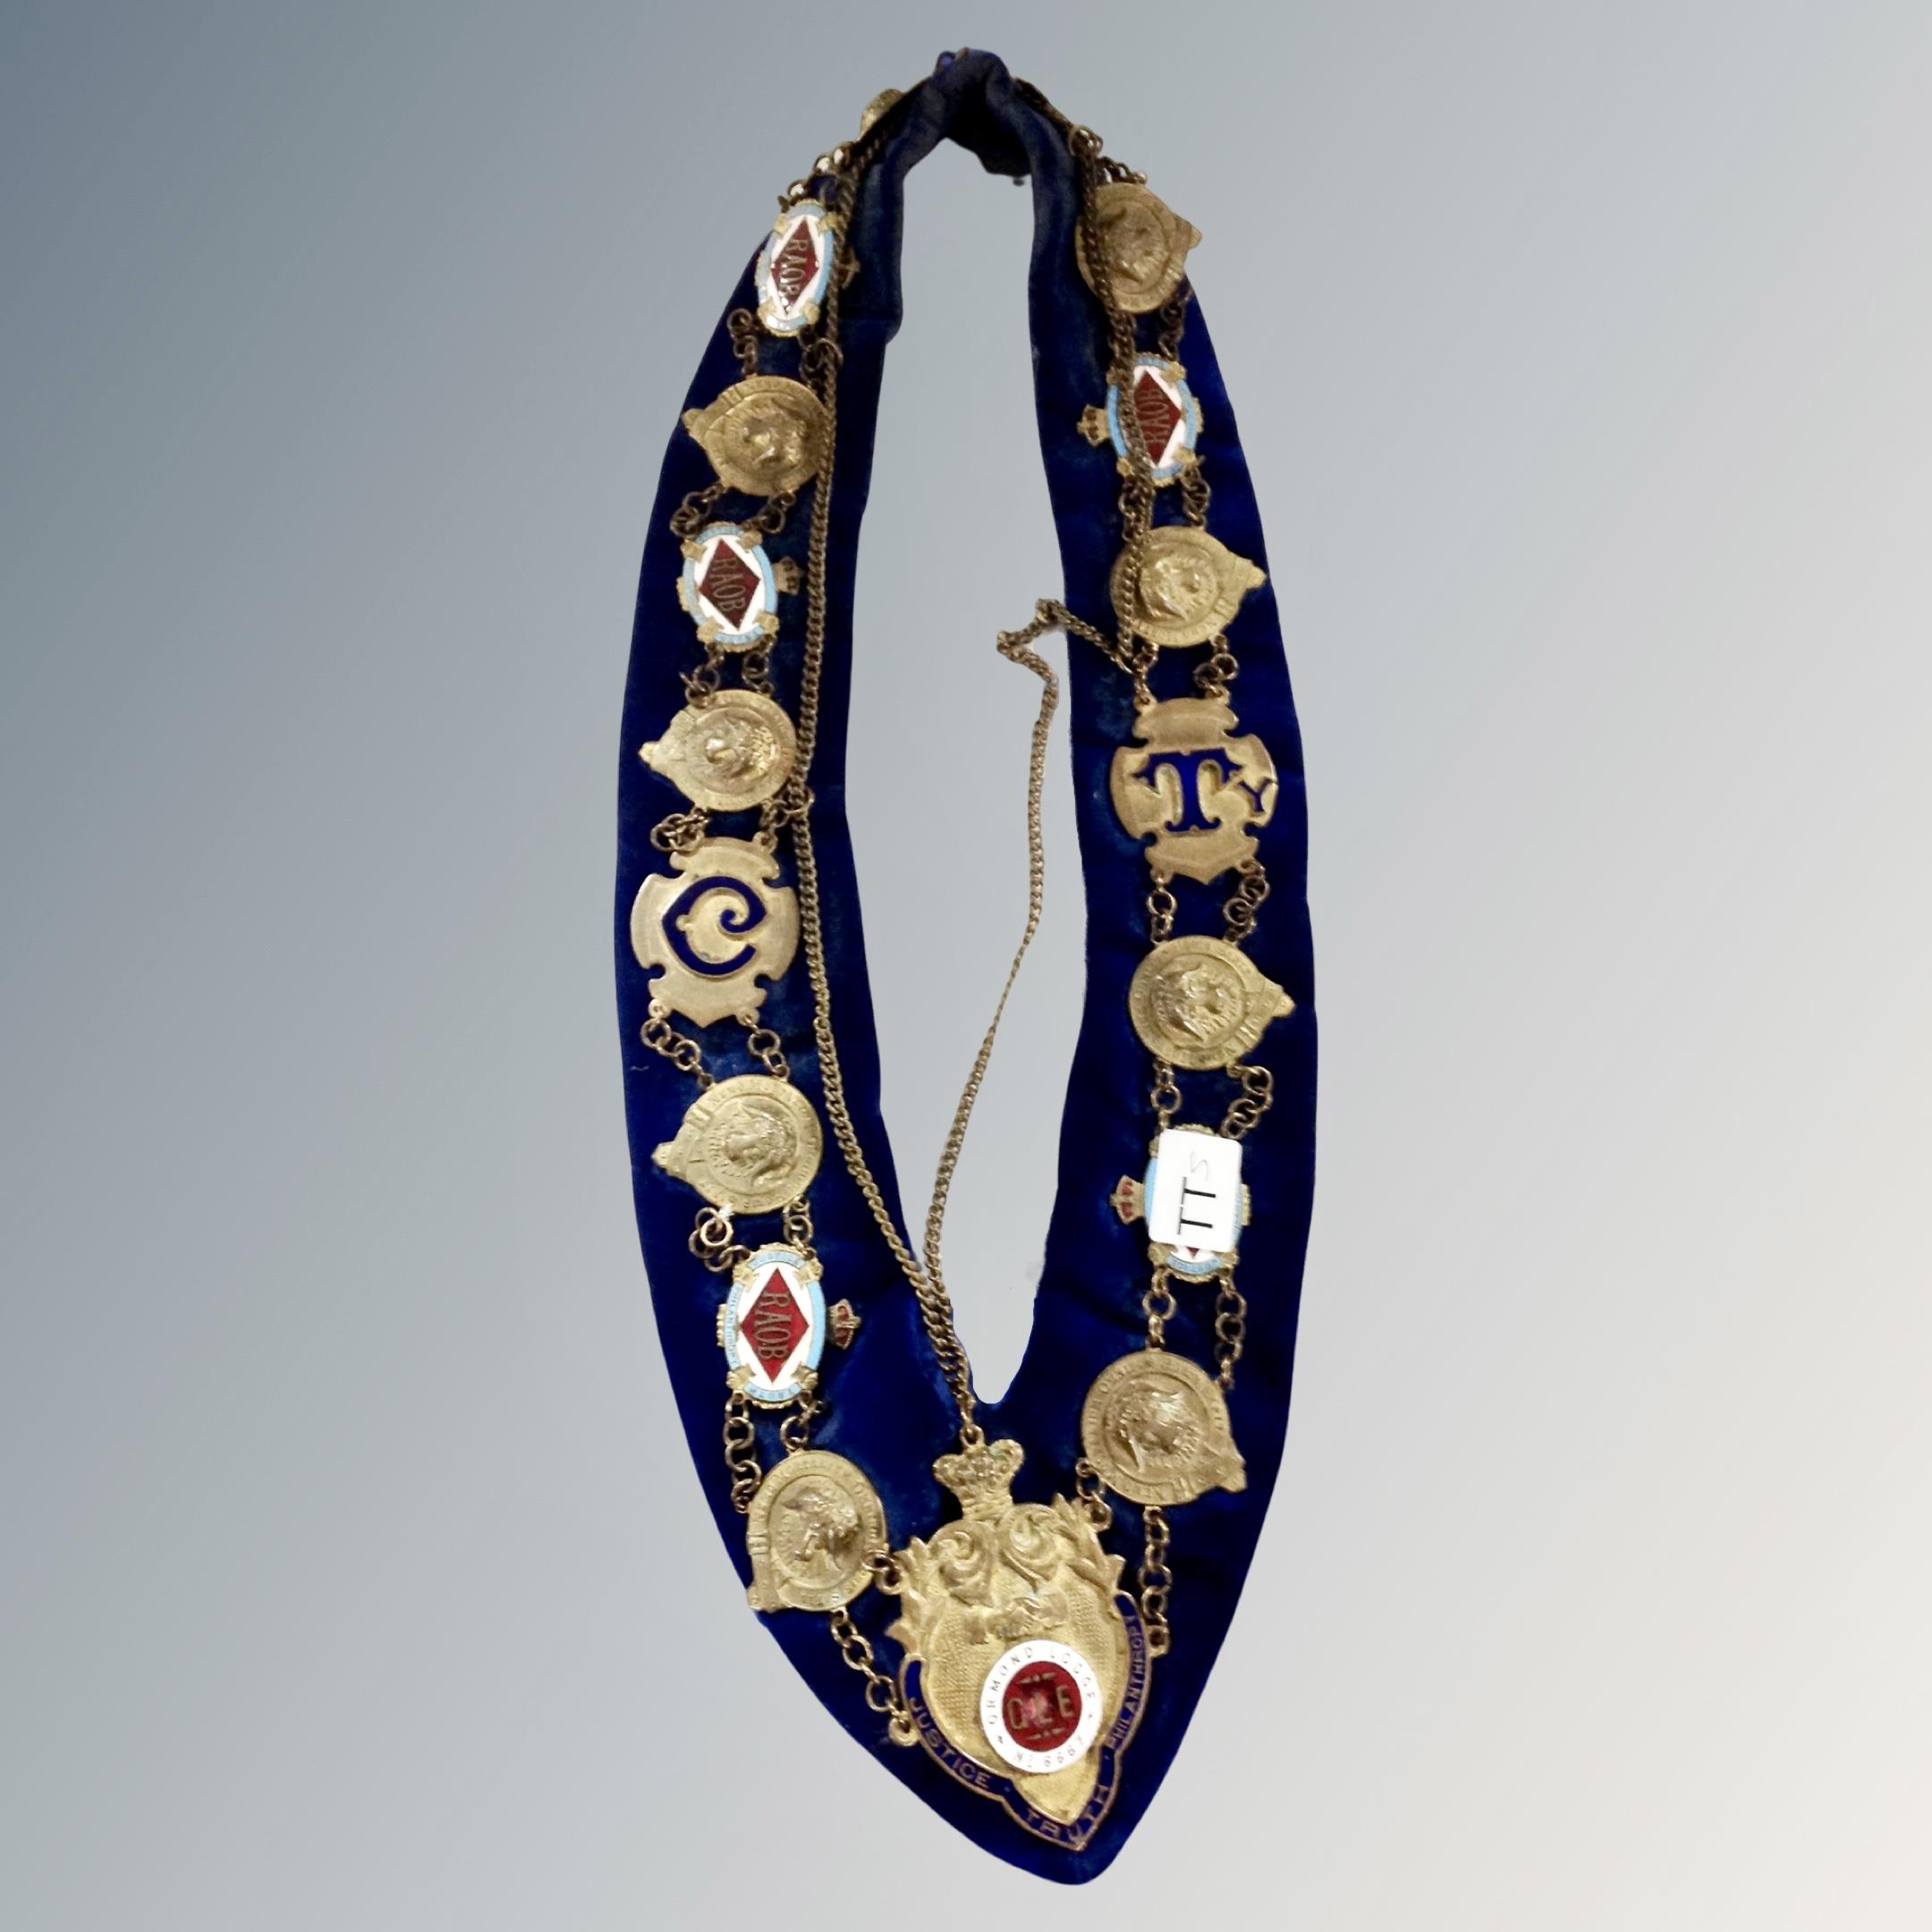 A Masonic sash with medals, Ormond Lodge.